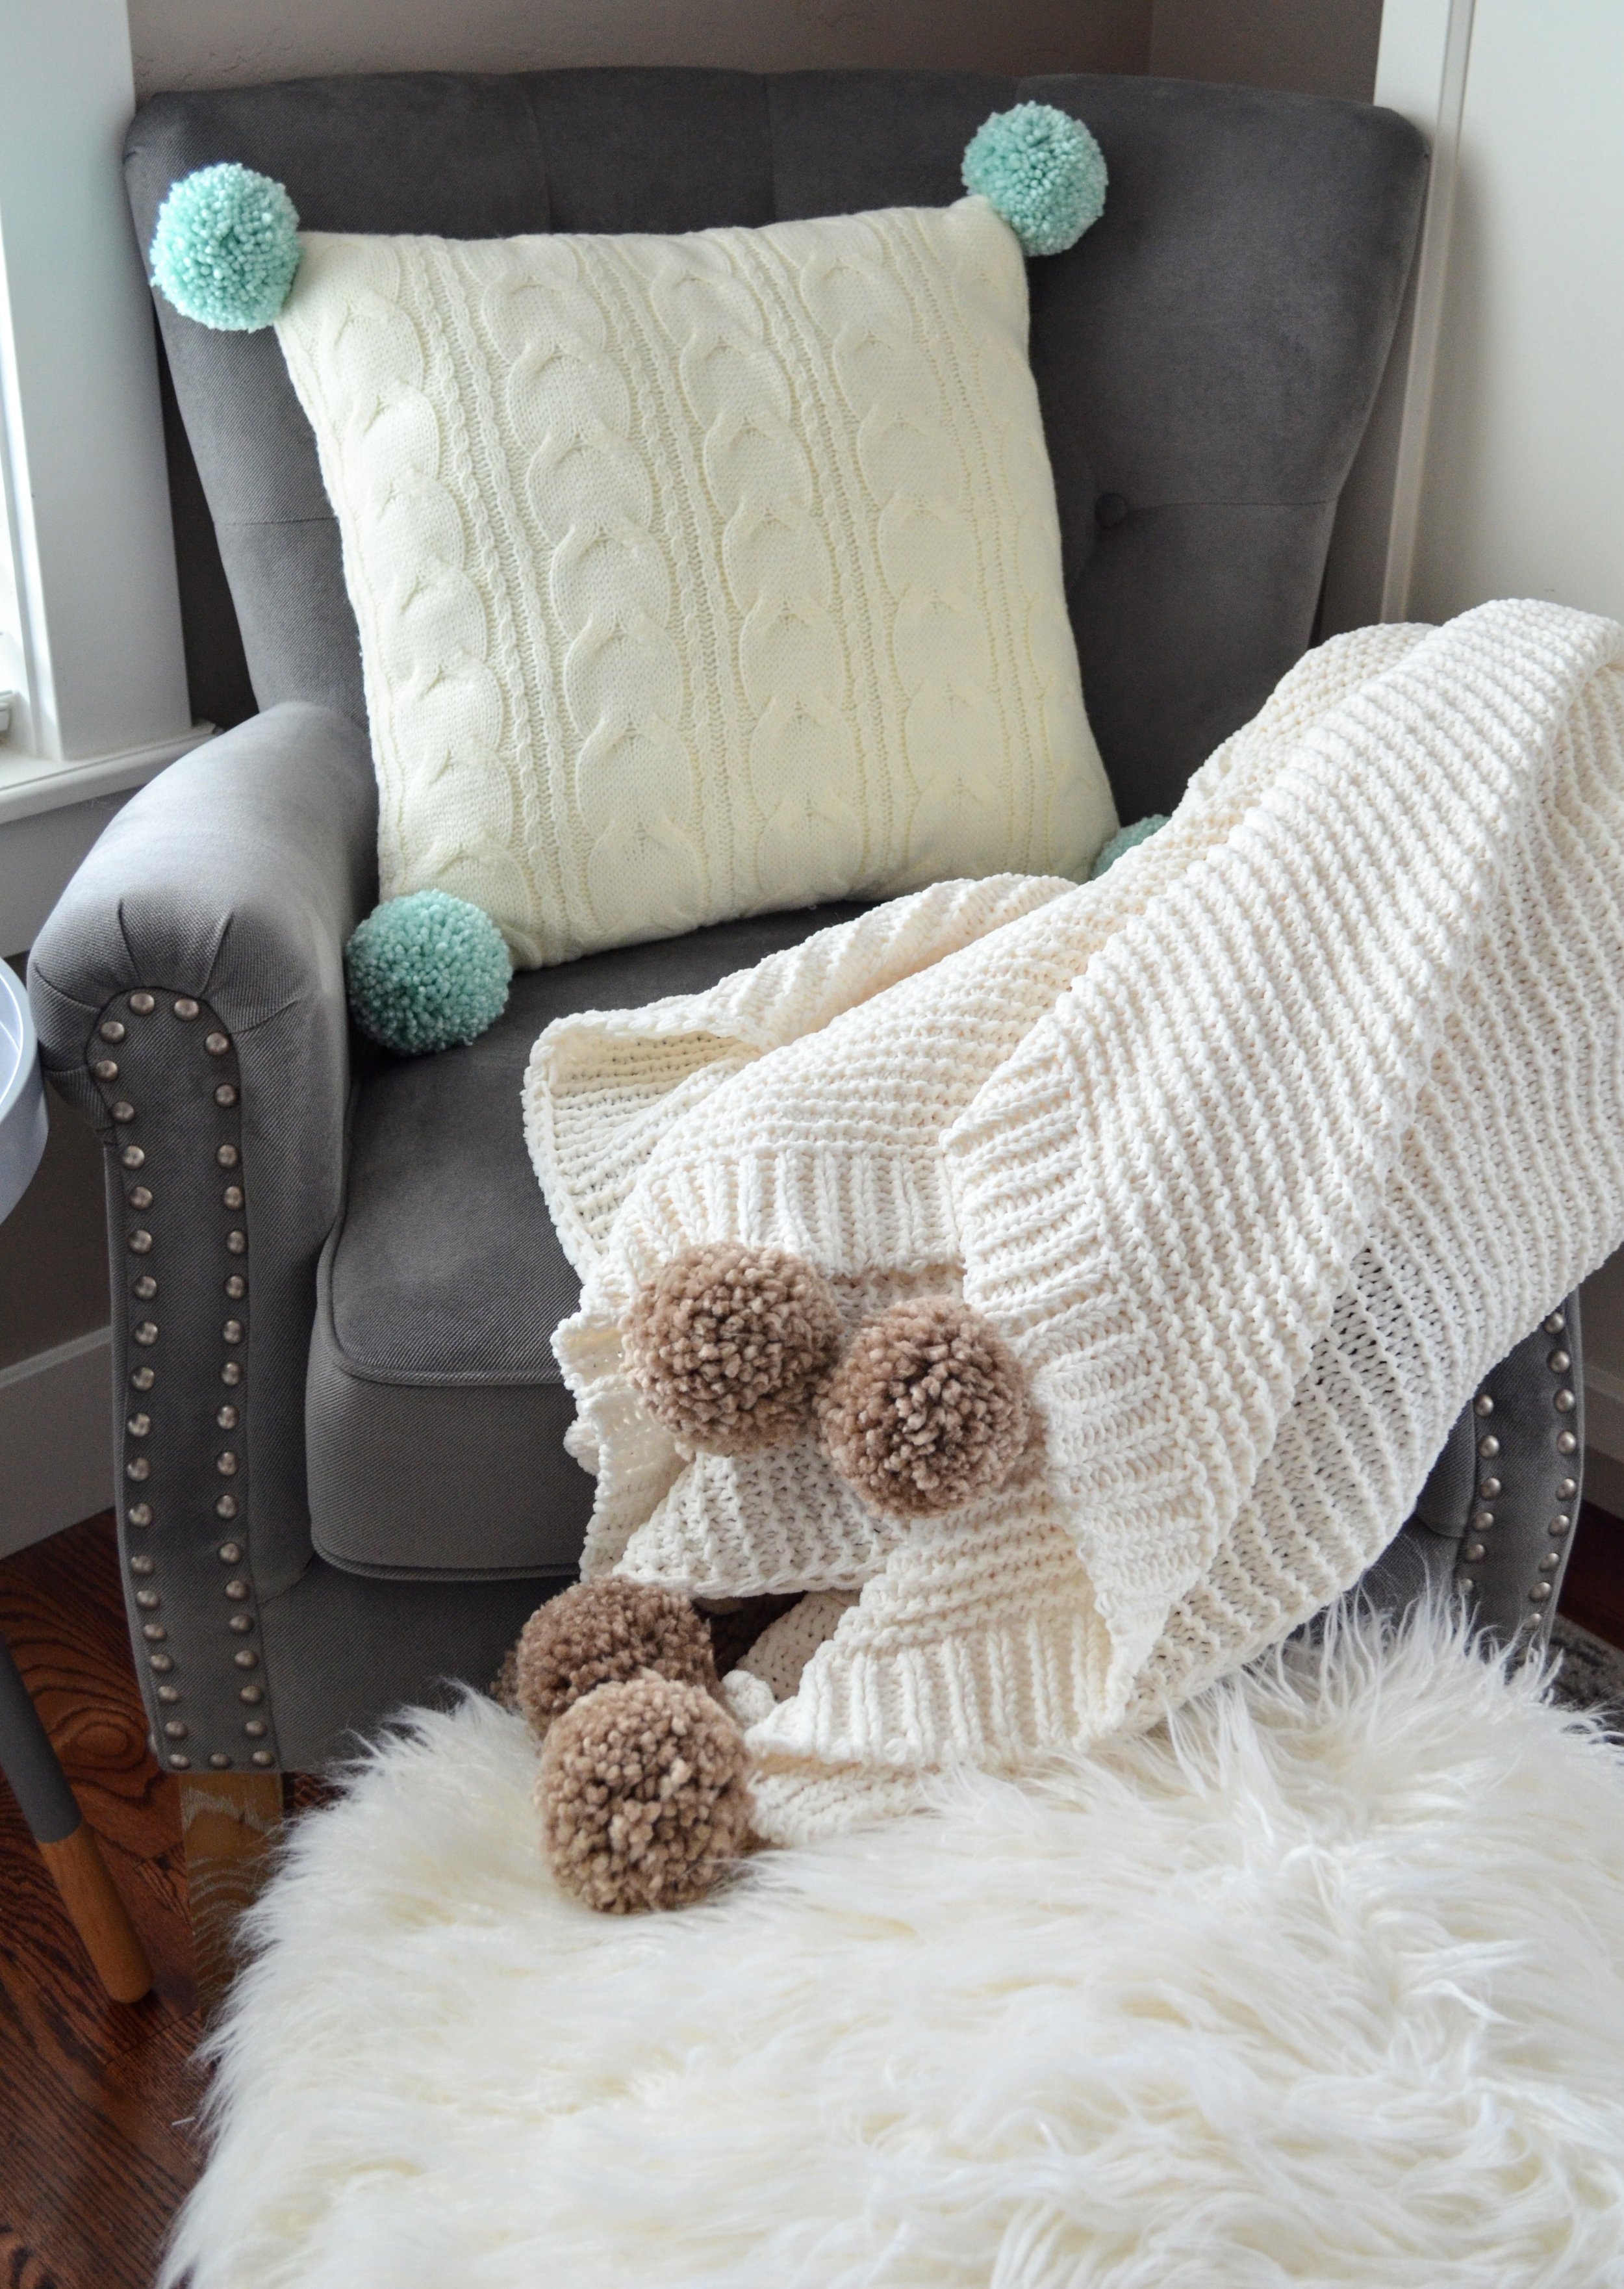 Cozy Up Your Home Adding Pom Poms And Tassels To Blankets And Pillows Apricot Polkadot